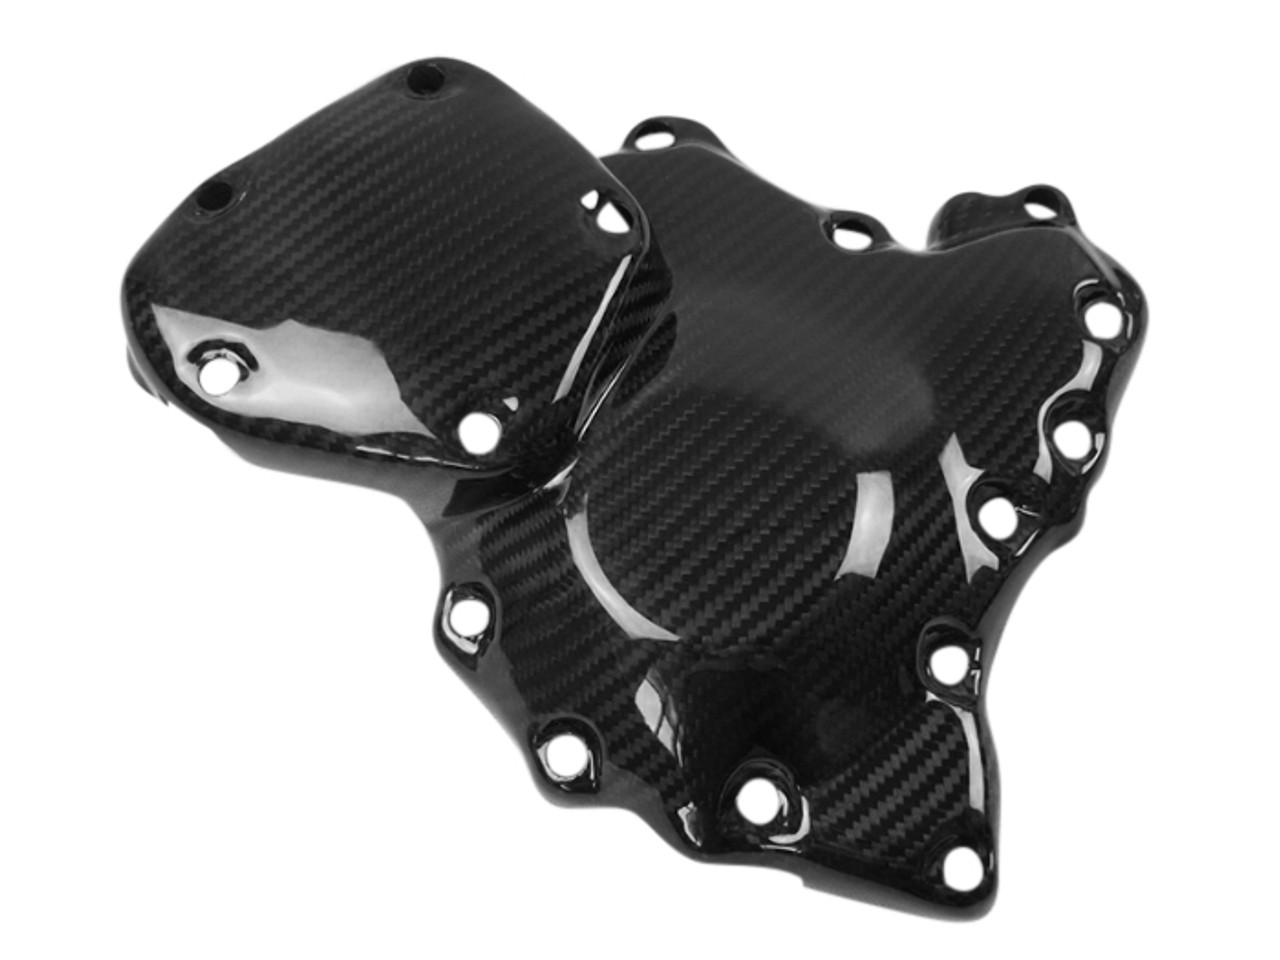 Stator Cover in Glossy Twill Weave Carbon Fiber for Triumph Speed Triple 1050R 2016+